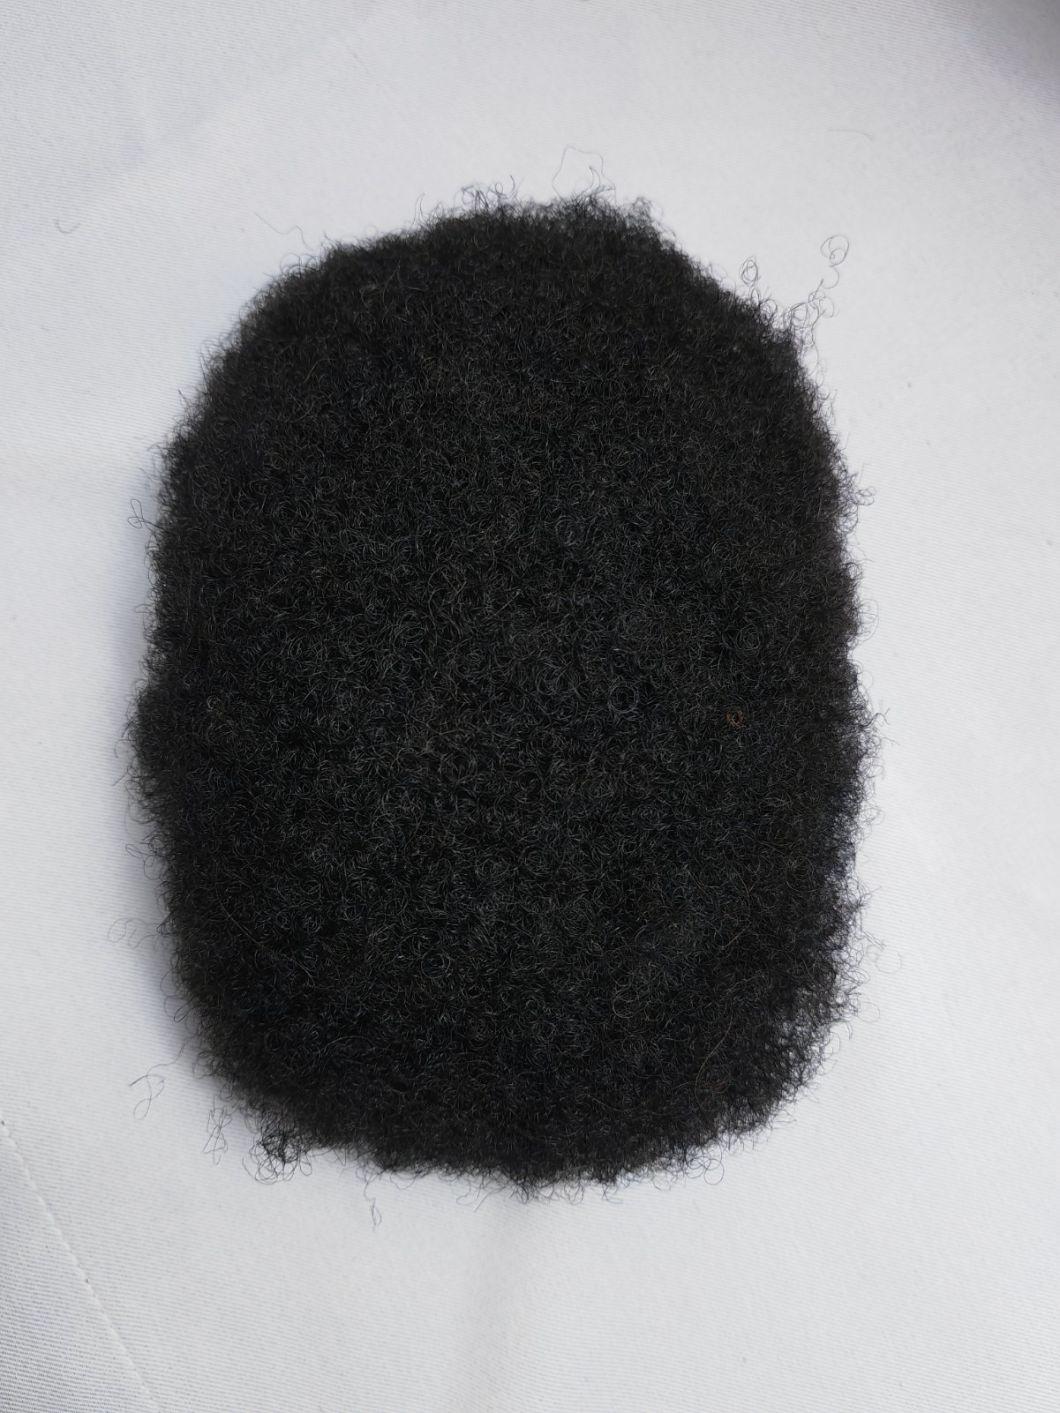 2022 Best Custom Made Comfortable Fine Mono Base Human Hair System Made of Remy Human Hair